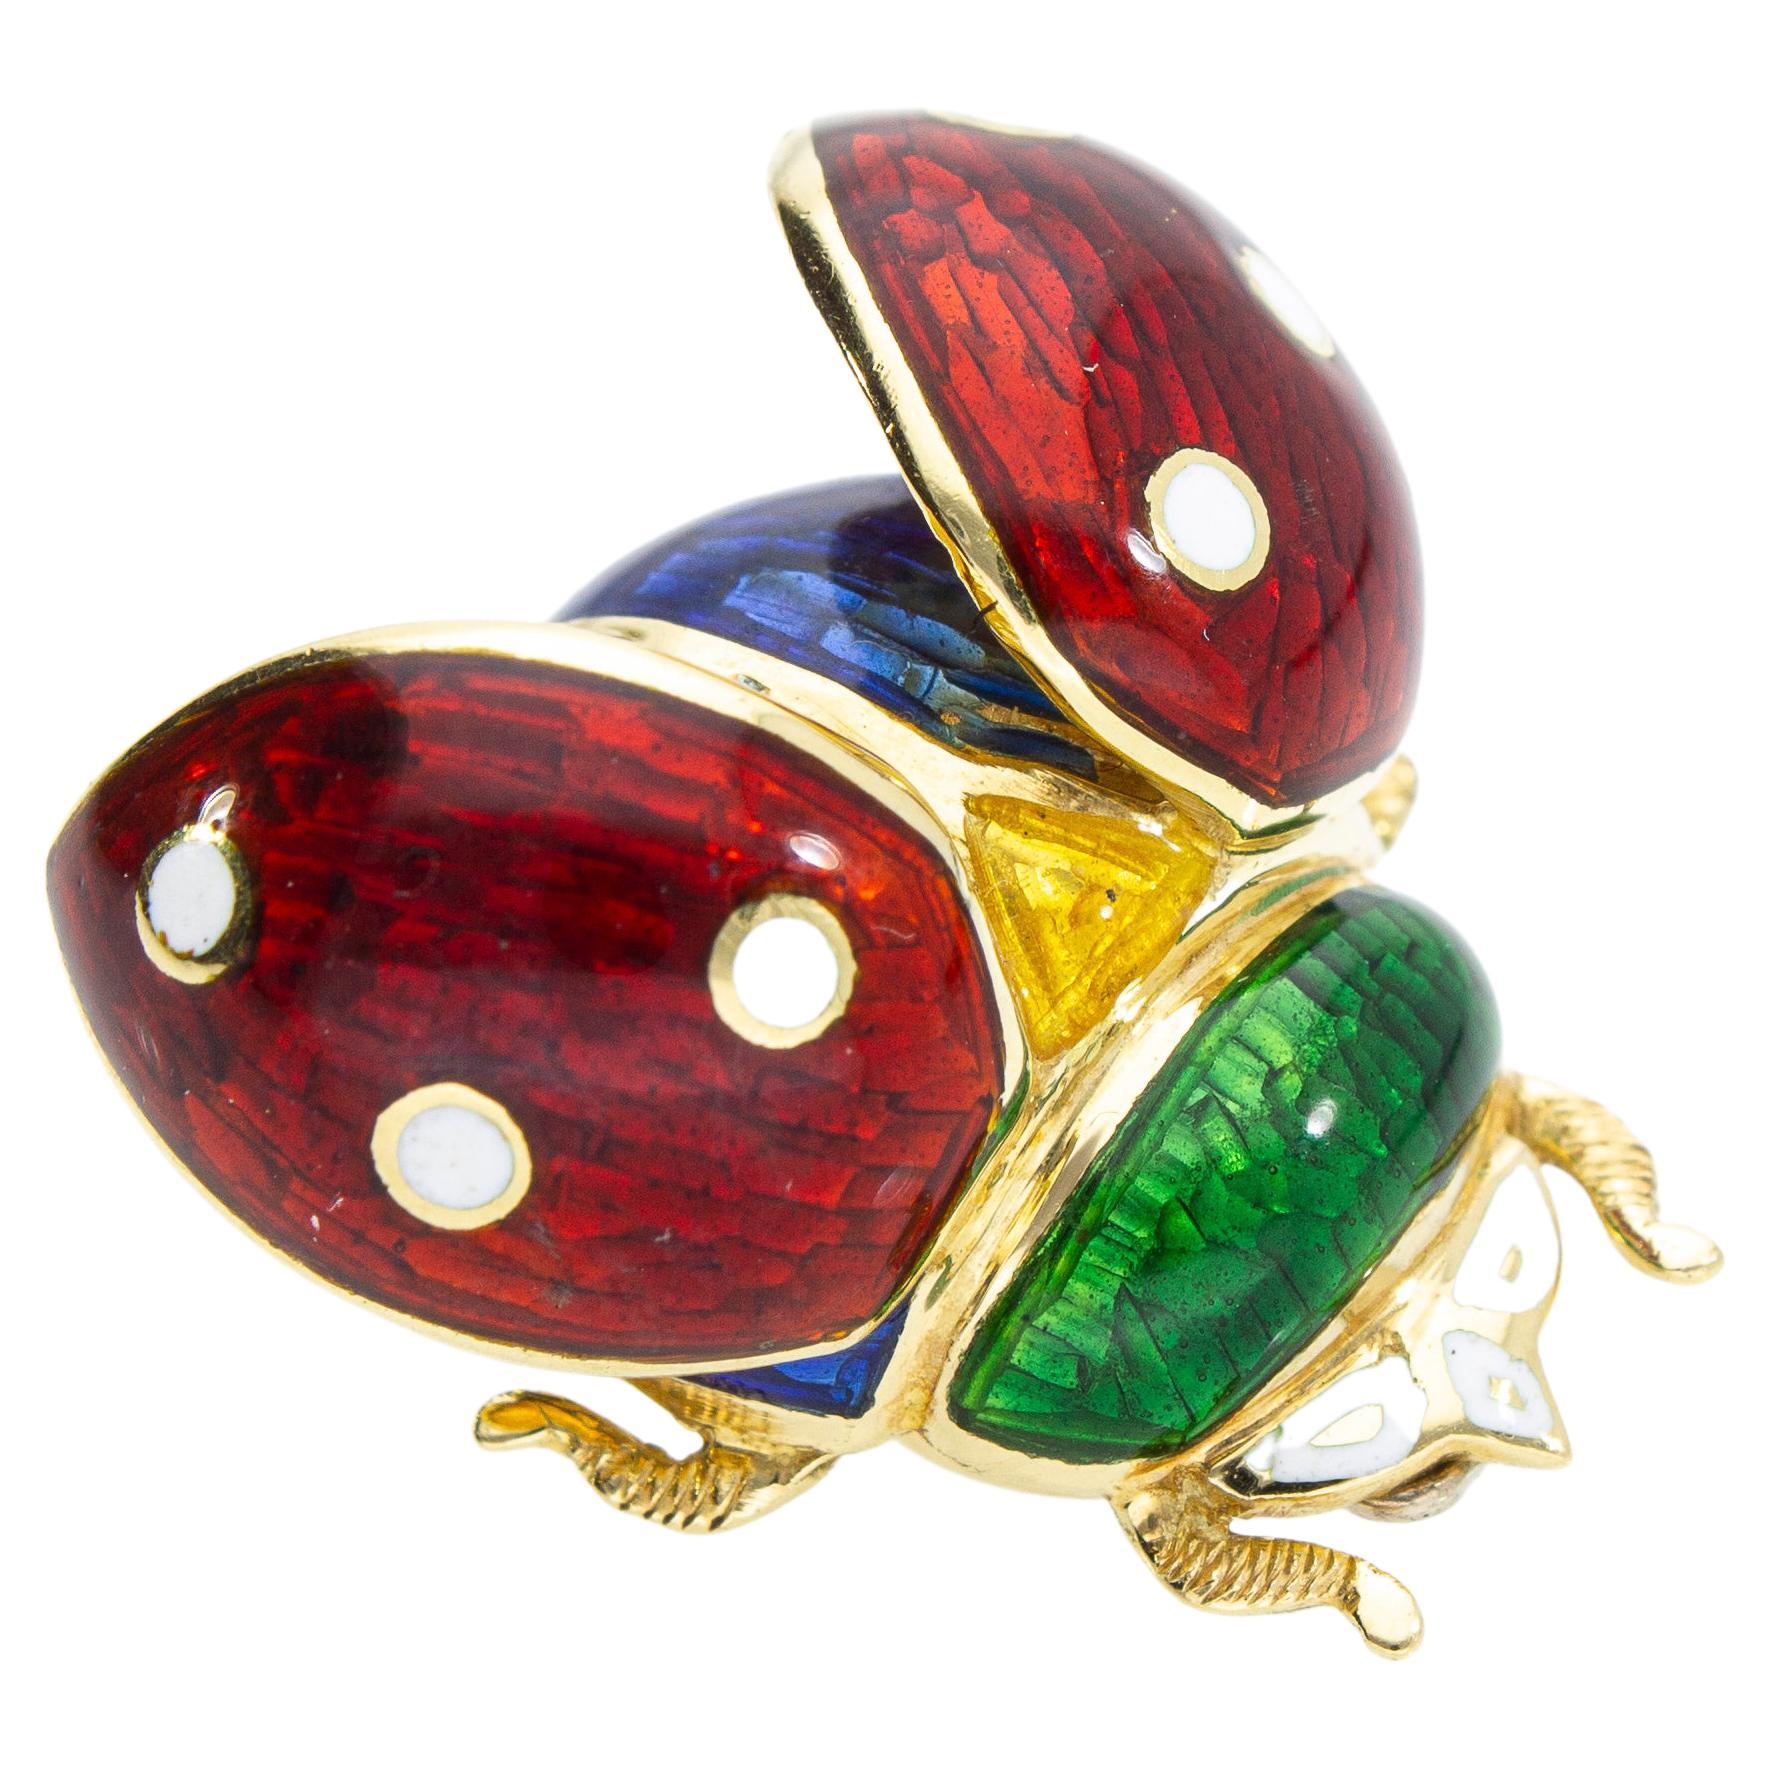 Ladybug-Shaped Pendant and Brooch with Enamel of Various Colors For Sale